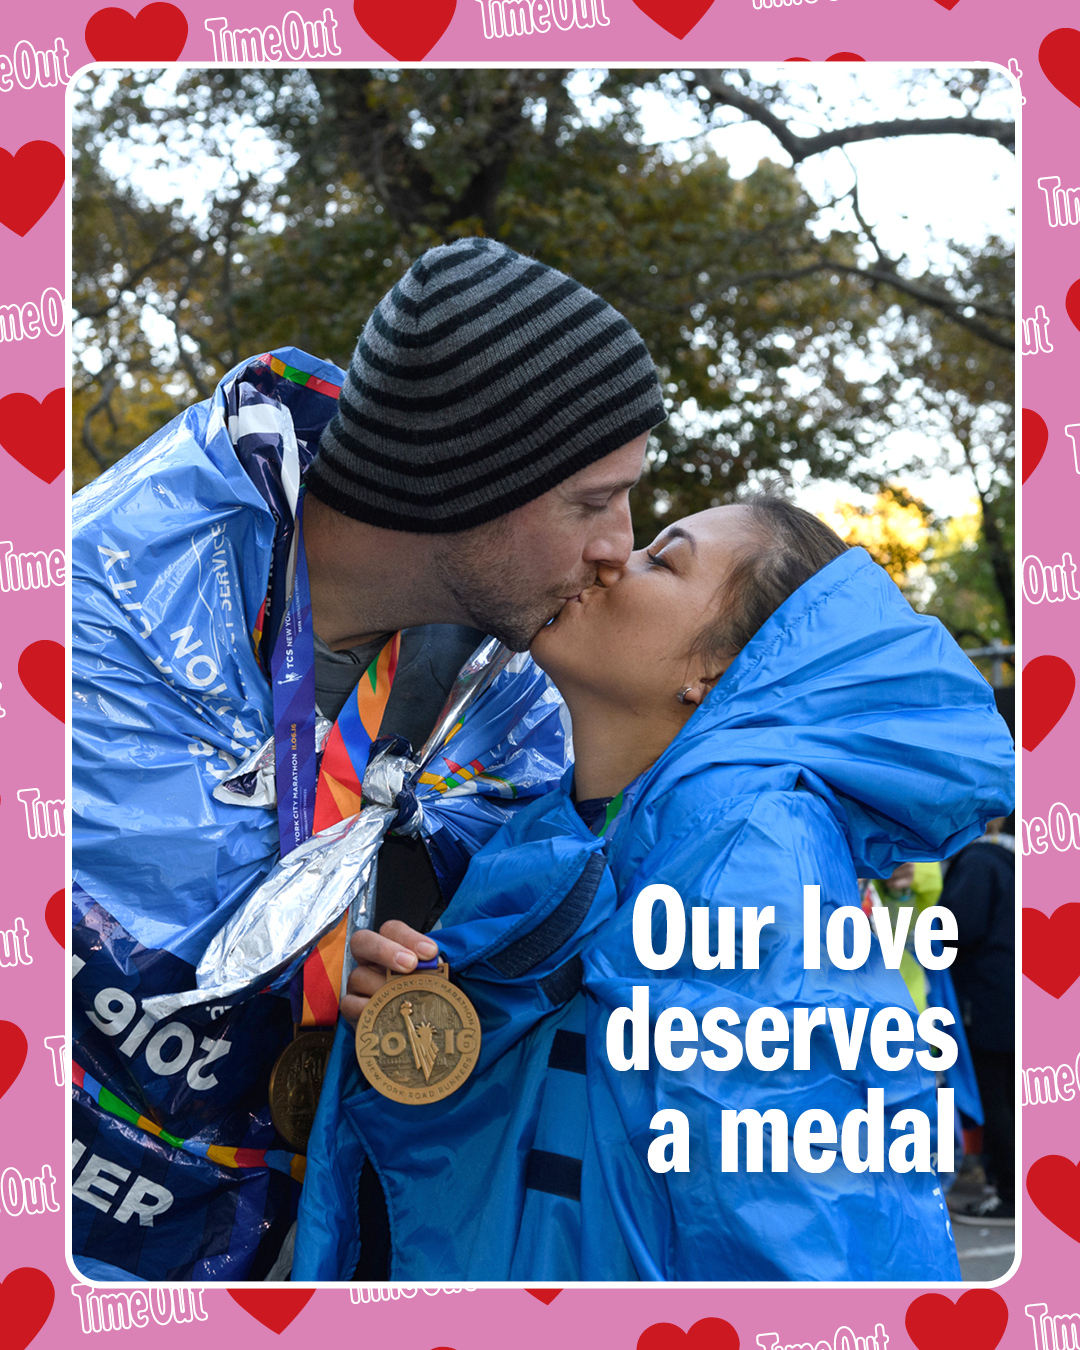 An NYC Valentine card with an NY Marathon medal reading "Our love deserves a medal." 